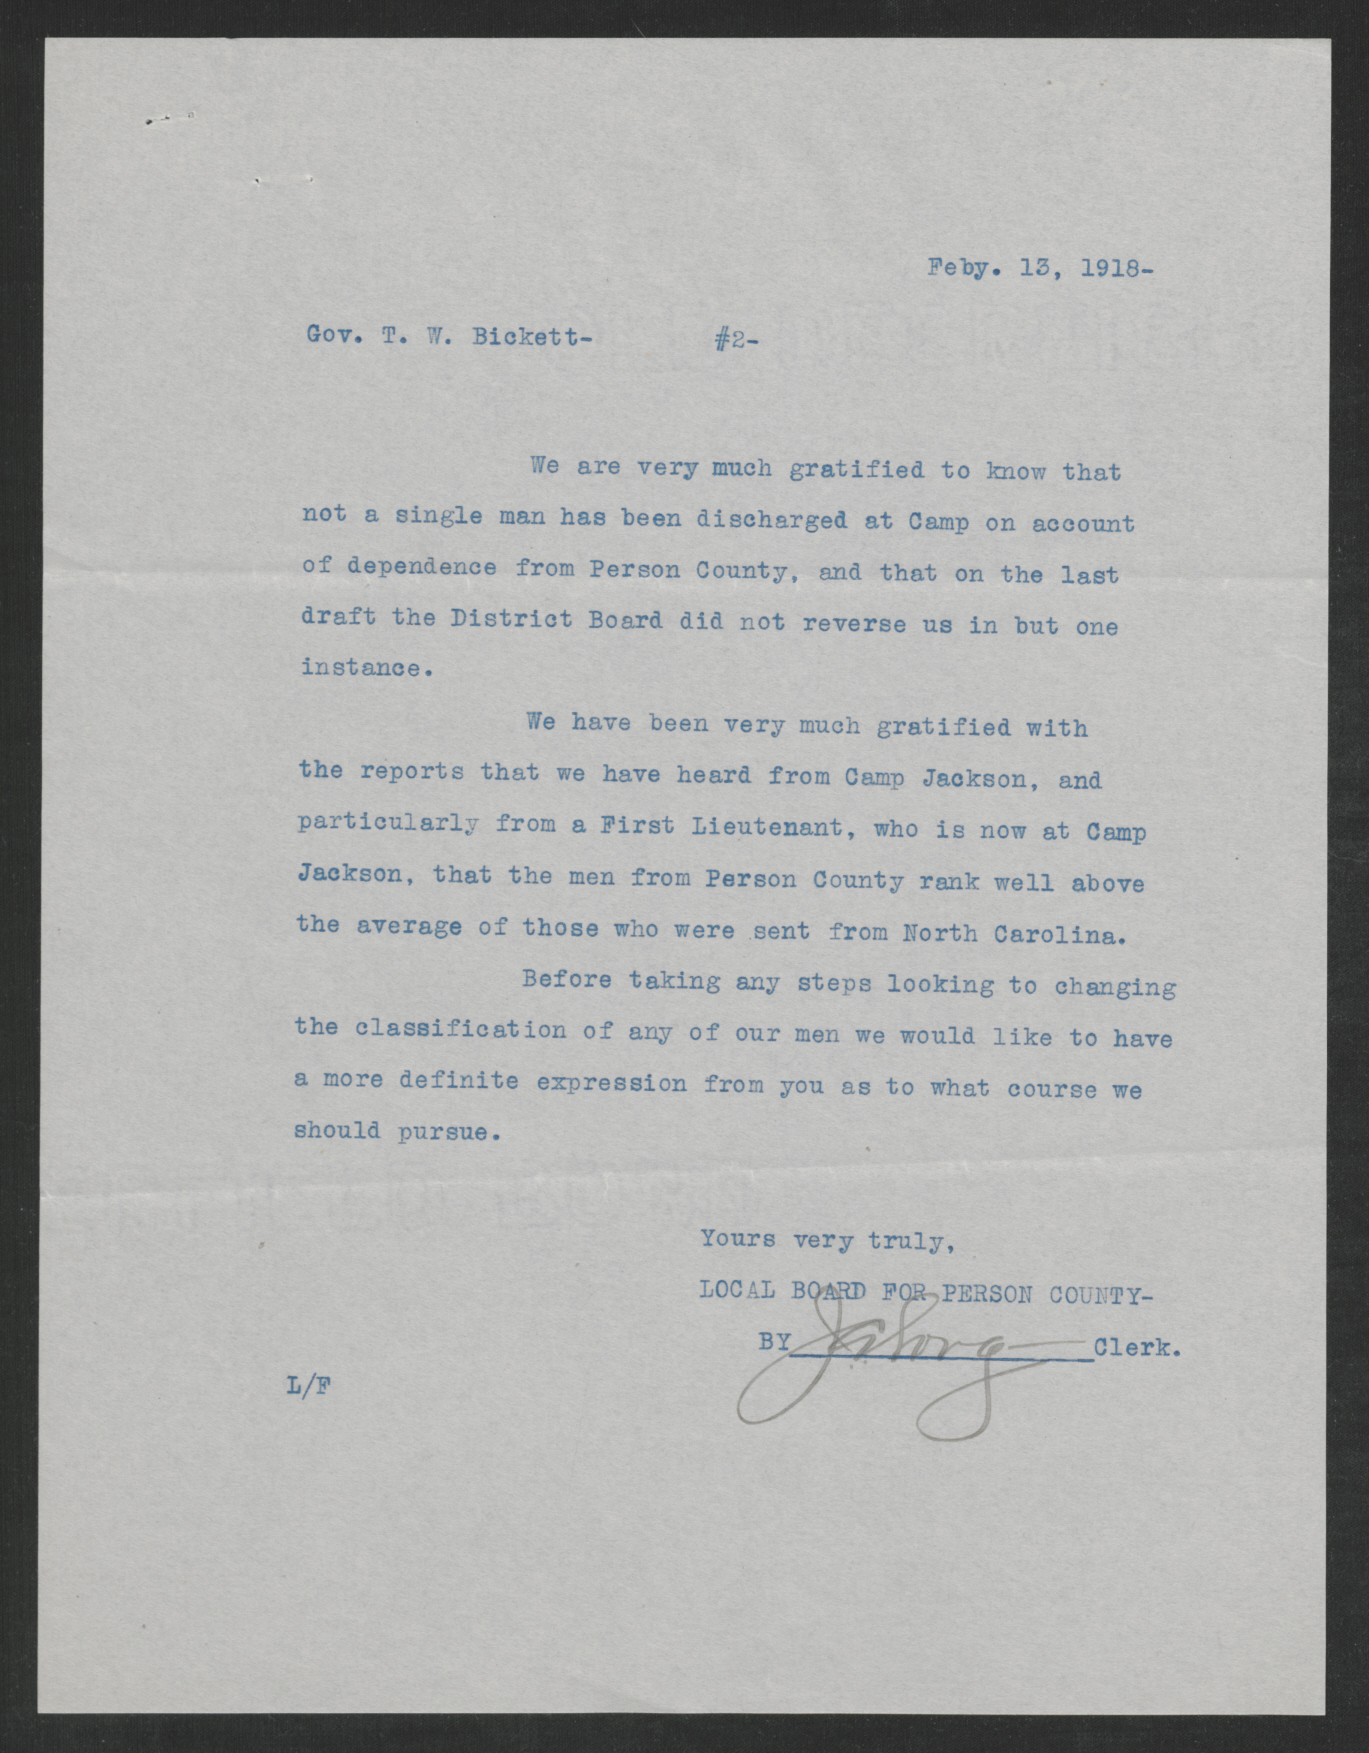 Letter from James A. Long to Thomas W. Bickett, February 13, 1918, page 2